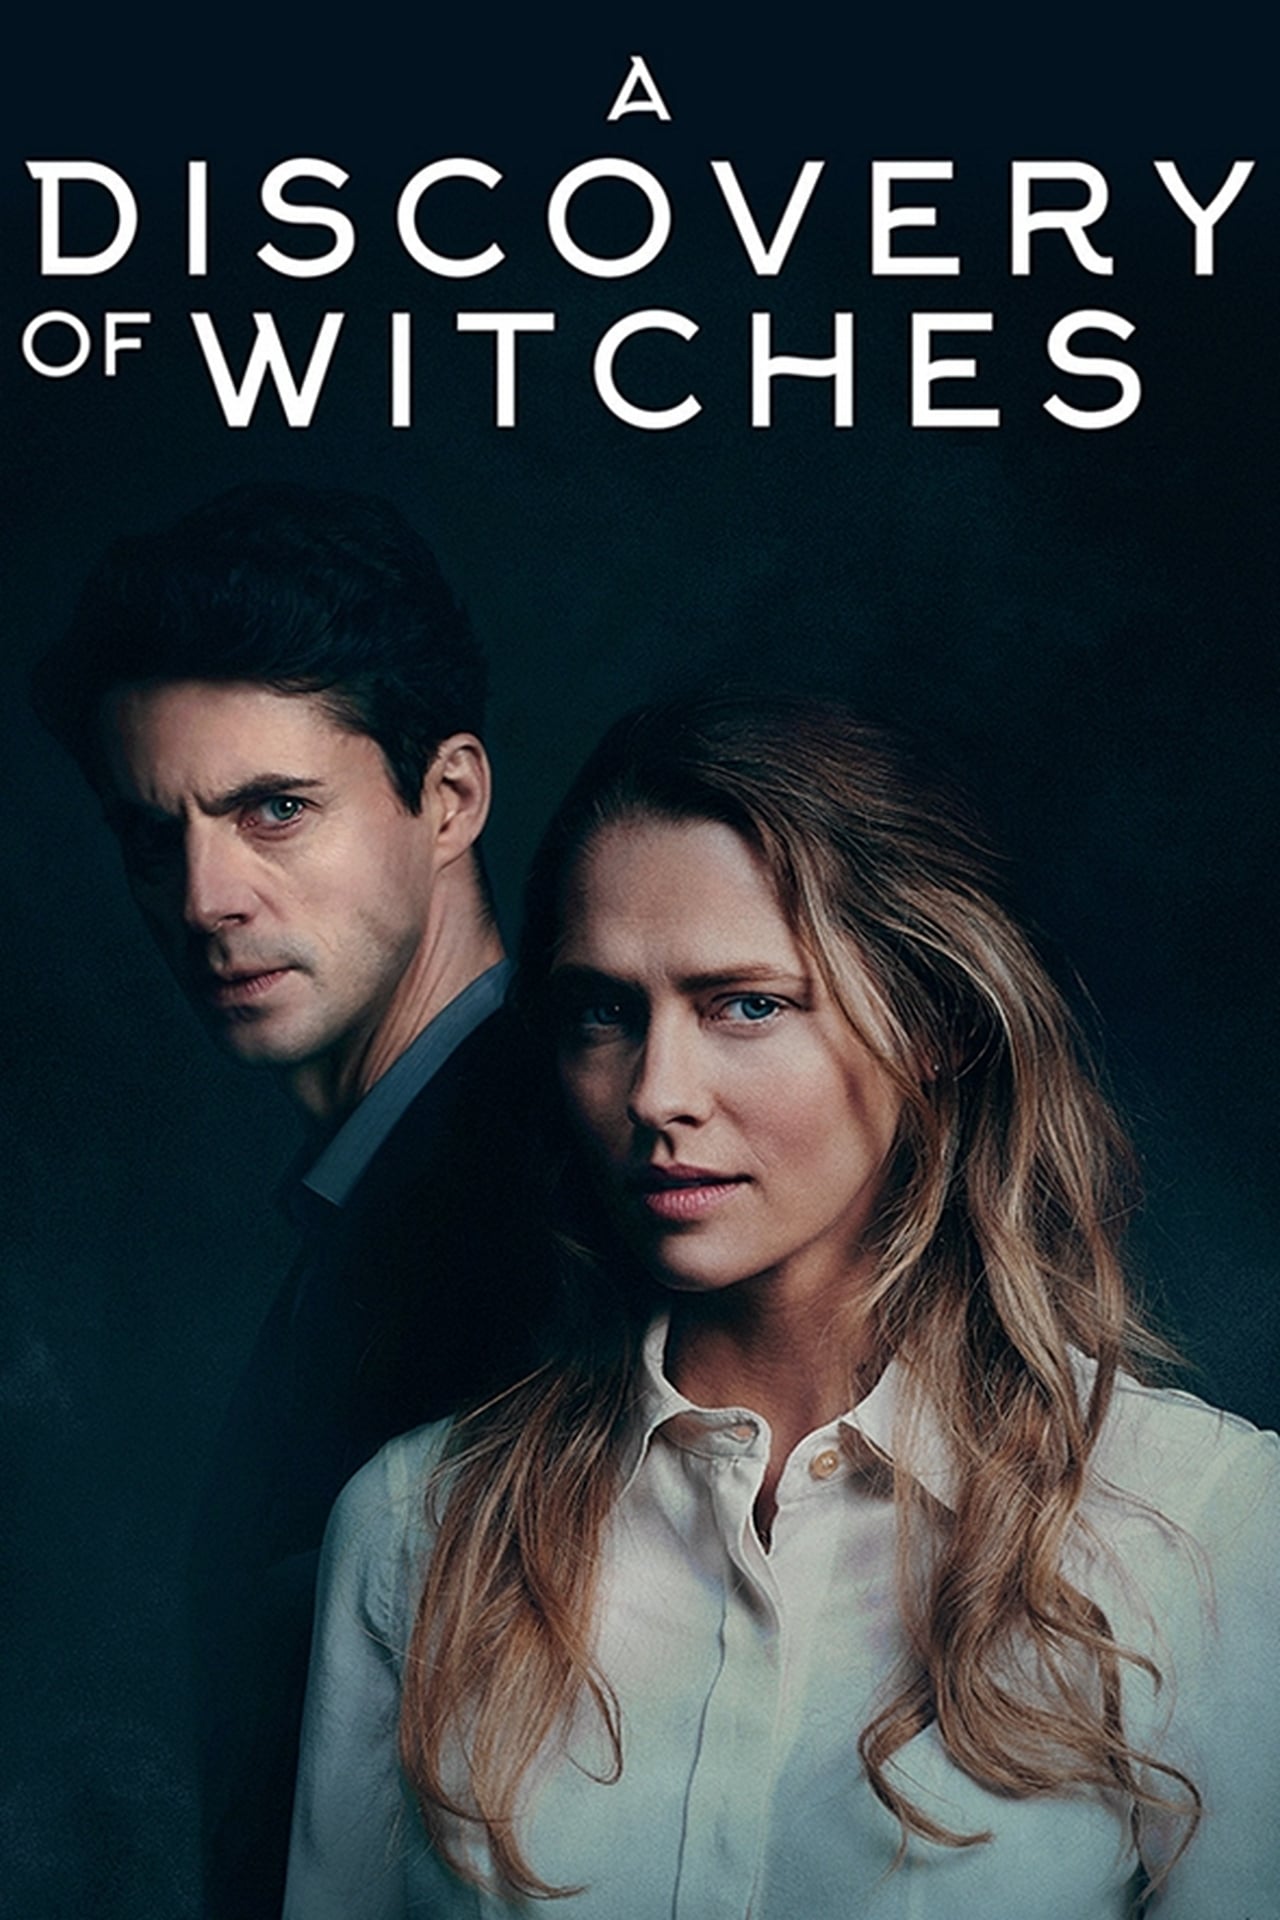 A Discovery of Witches (season 2)